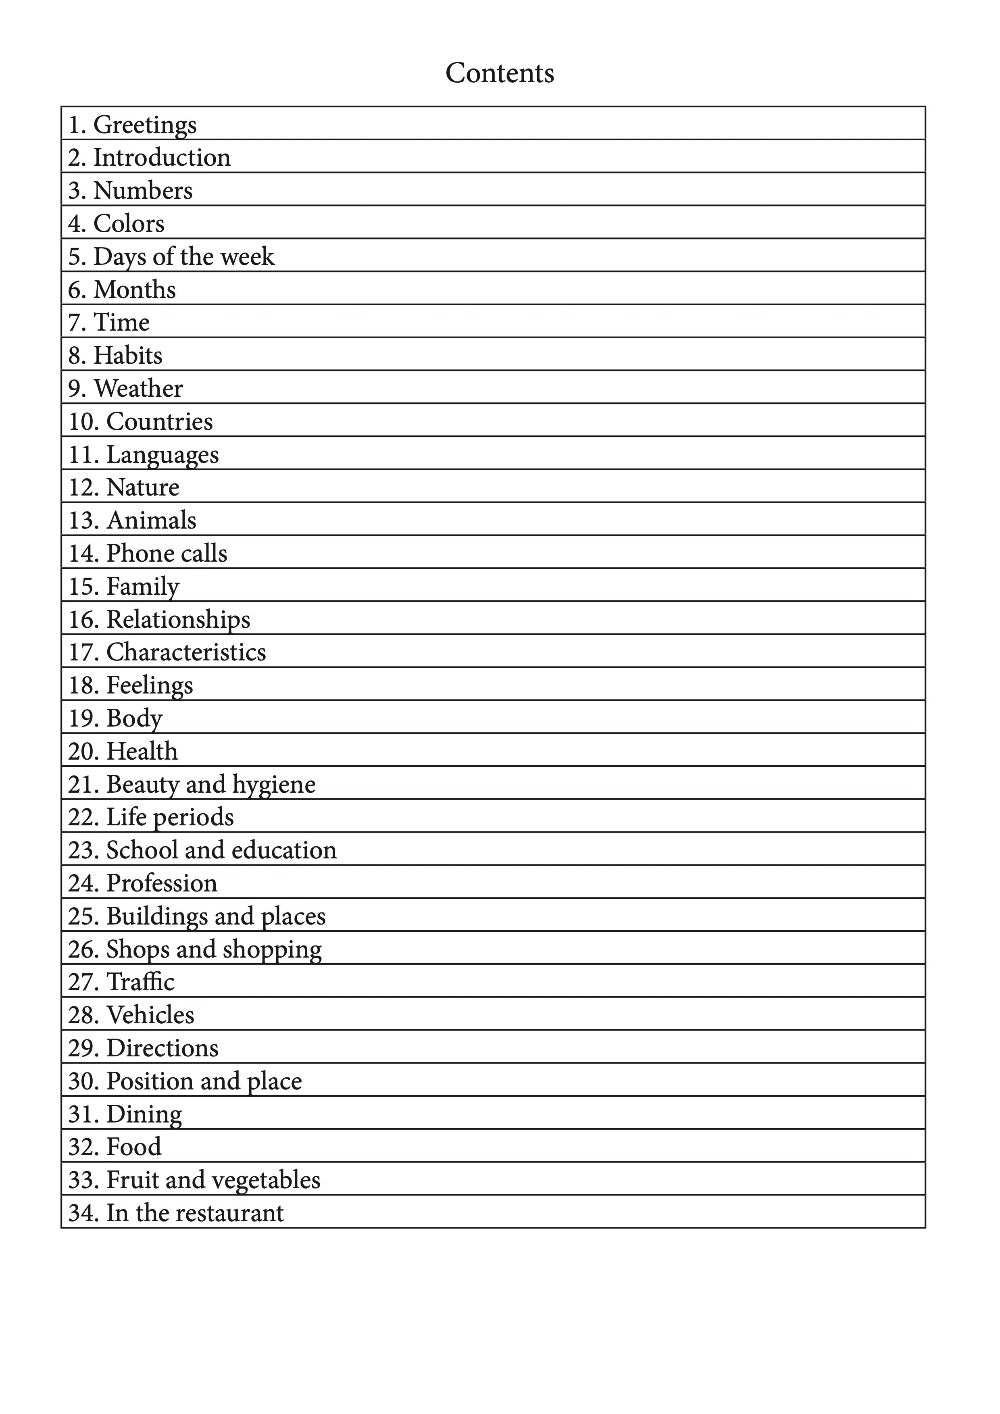 Meitei language learning notebook contents page 1